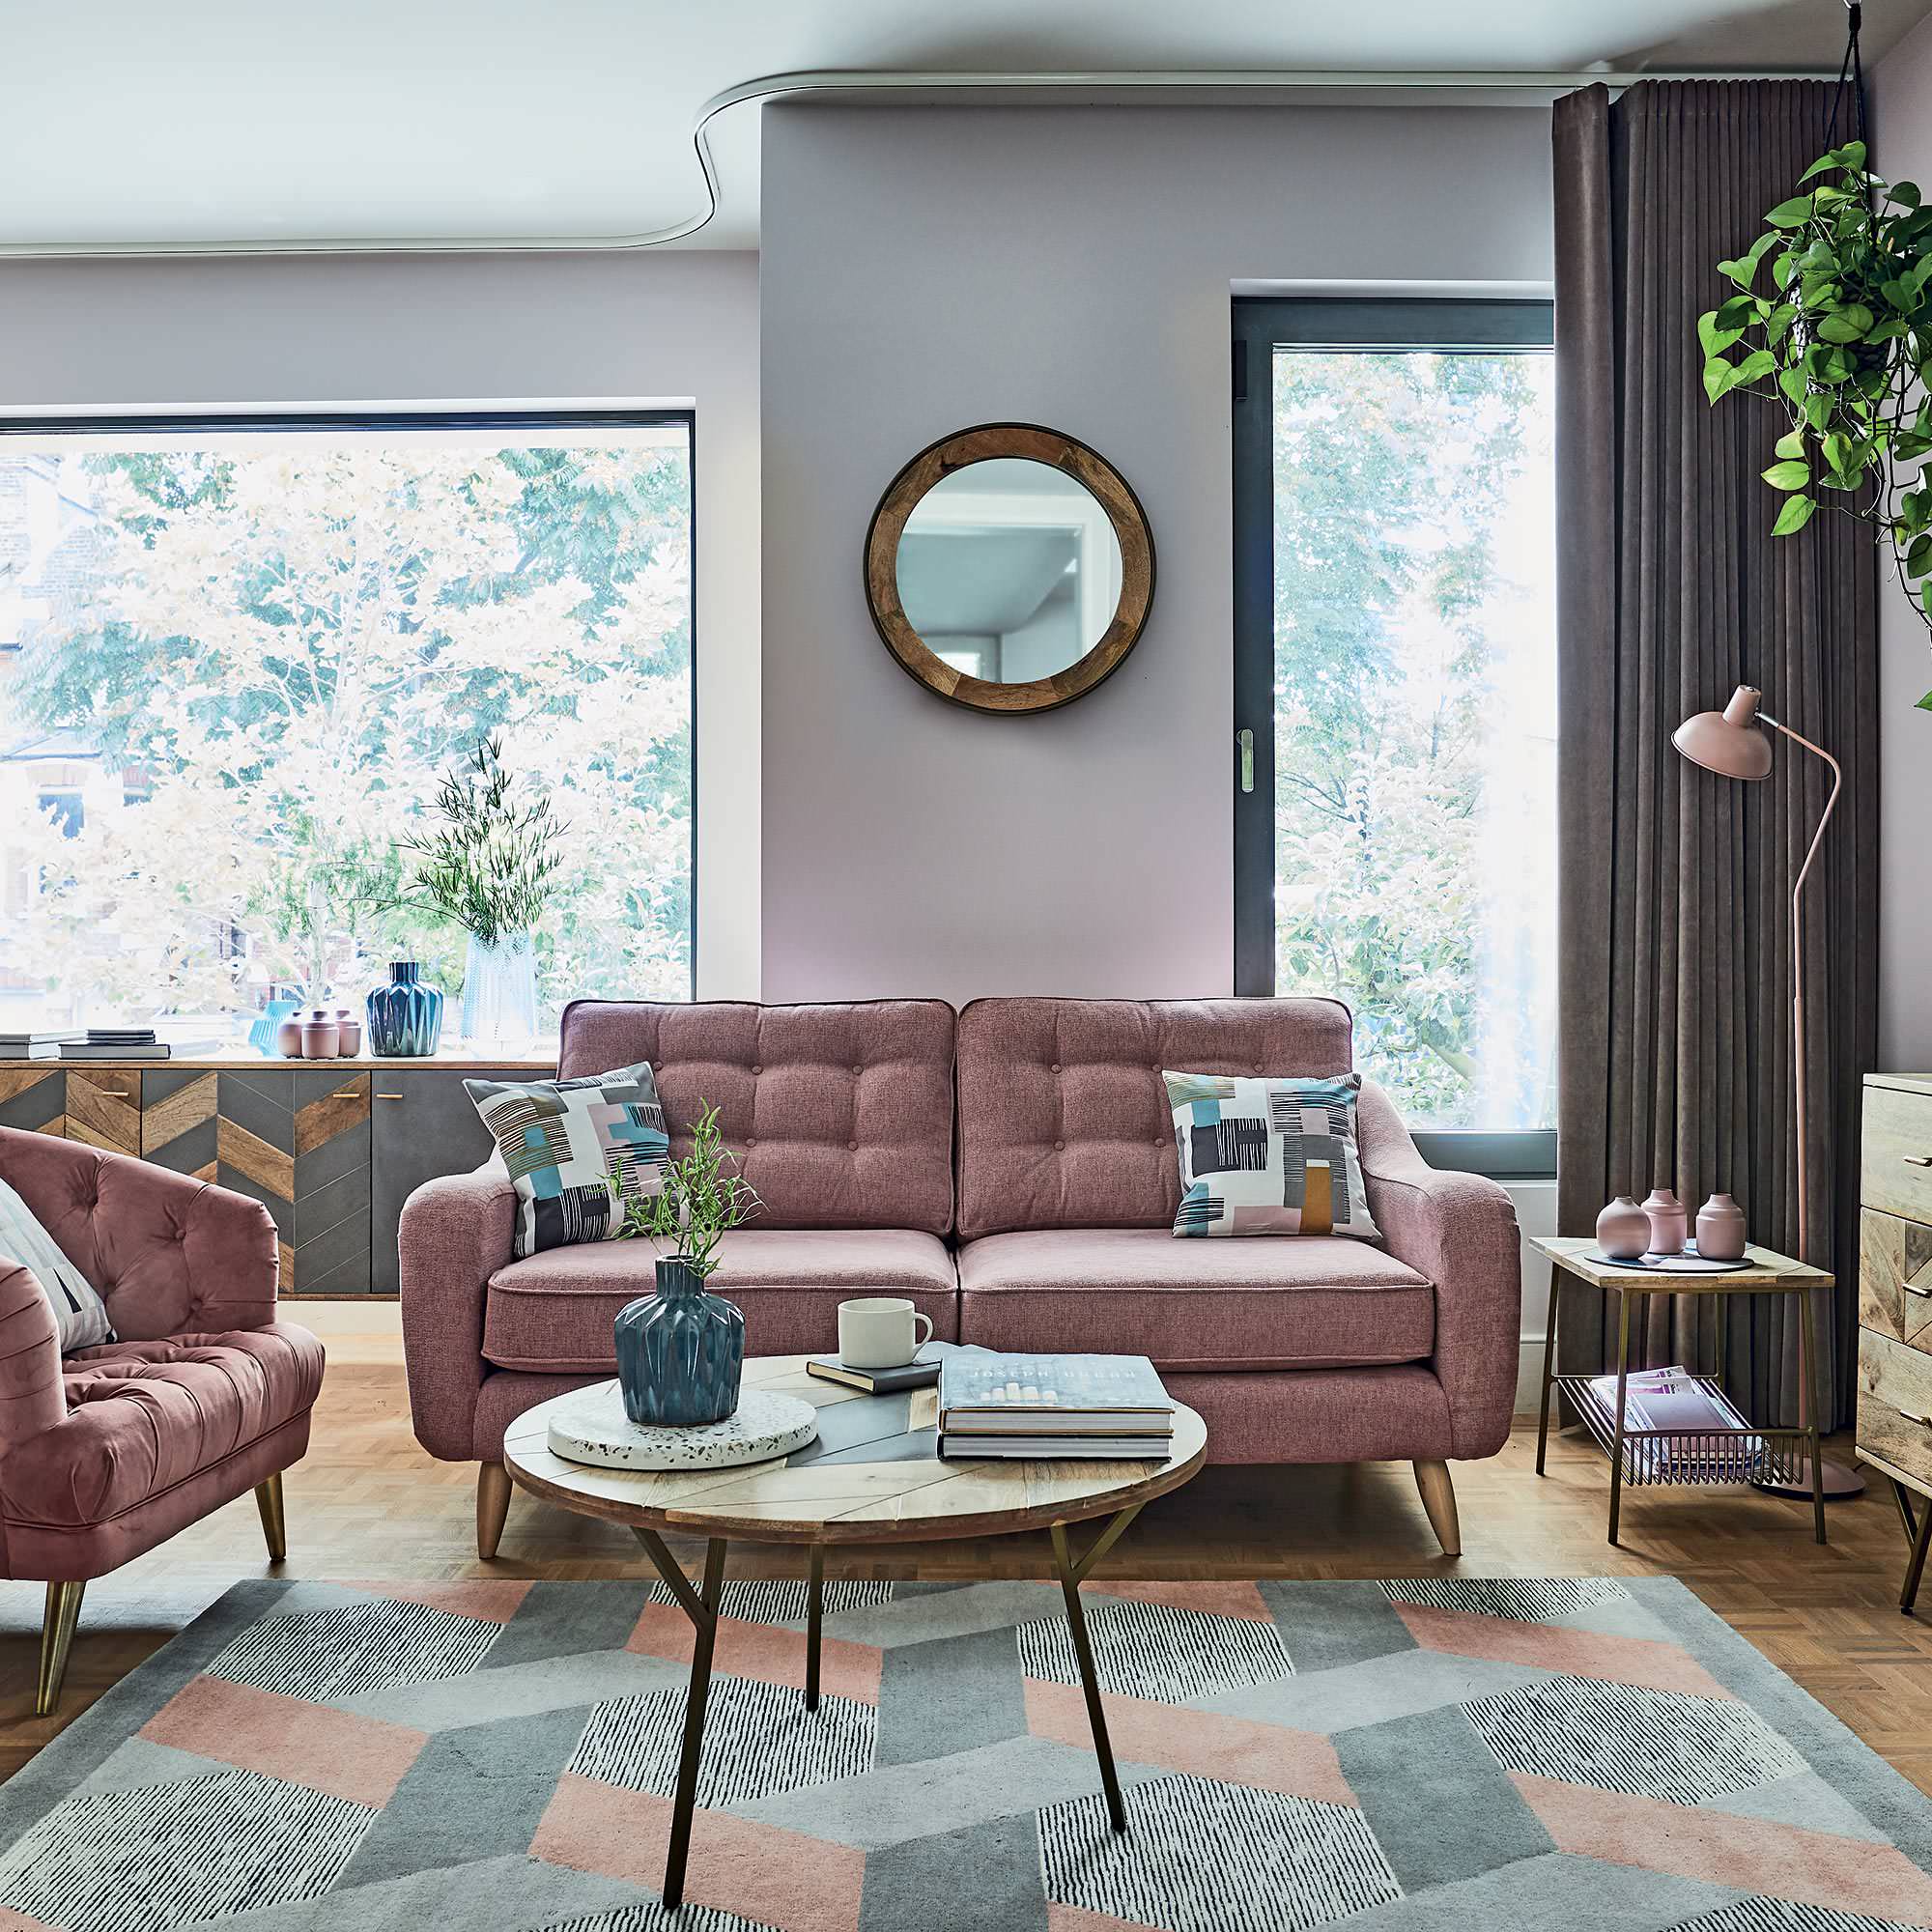 Modern Jive | Midcentury Modern Sofa Range - Midcentury - Living Room -  Other - by Barker and Stonehouse | Houzz